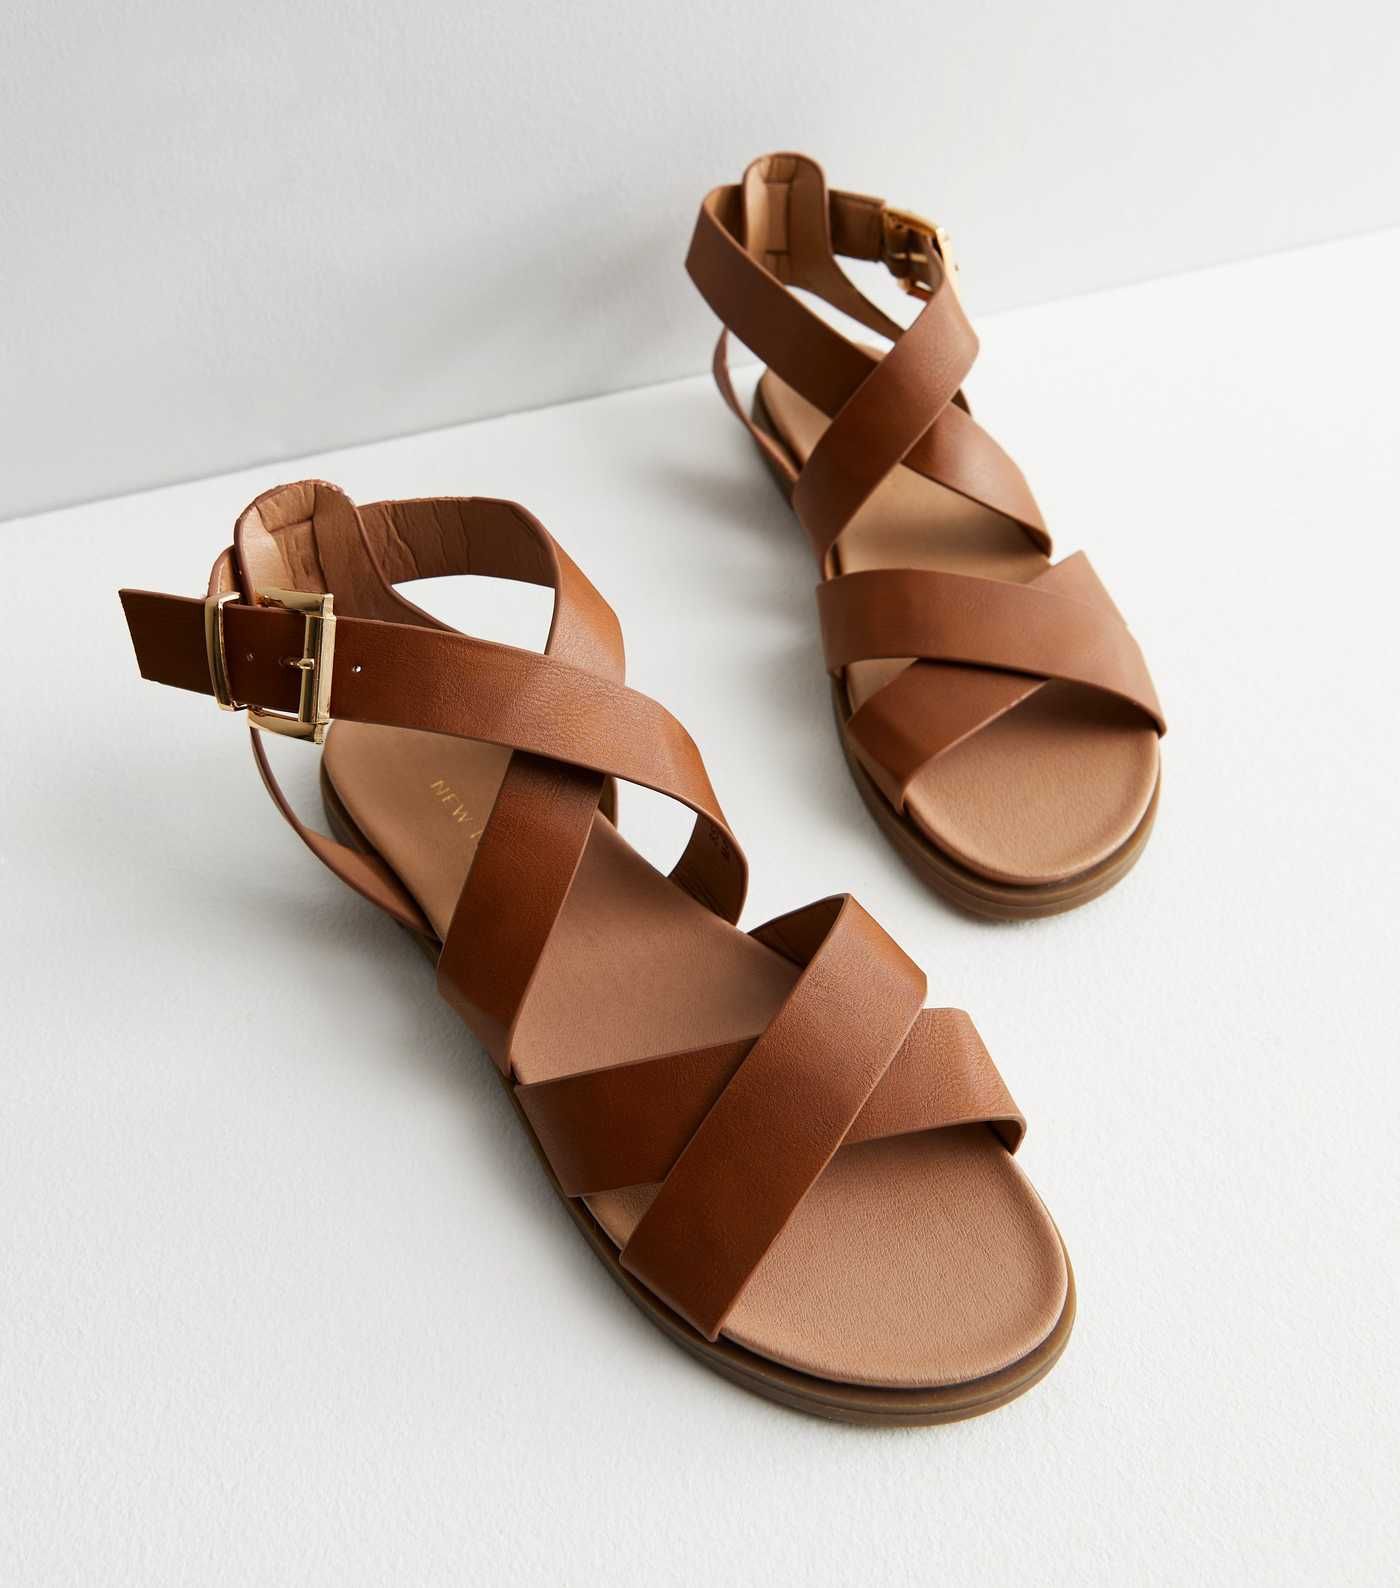 Tan Leather-Look Strappy Footbed Sandals
						
						Add to Saved Items
						Remove from Saved ... | New Look (UK)